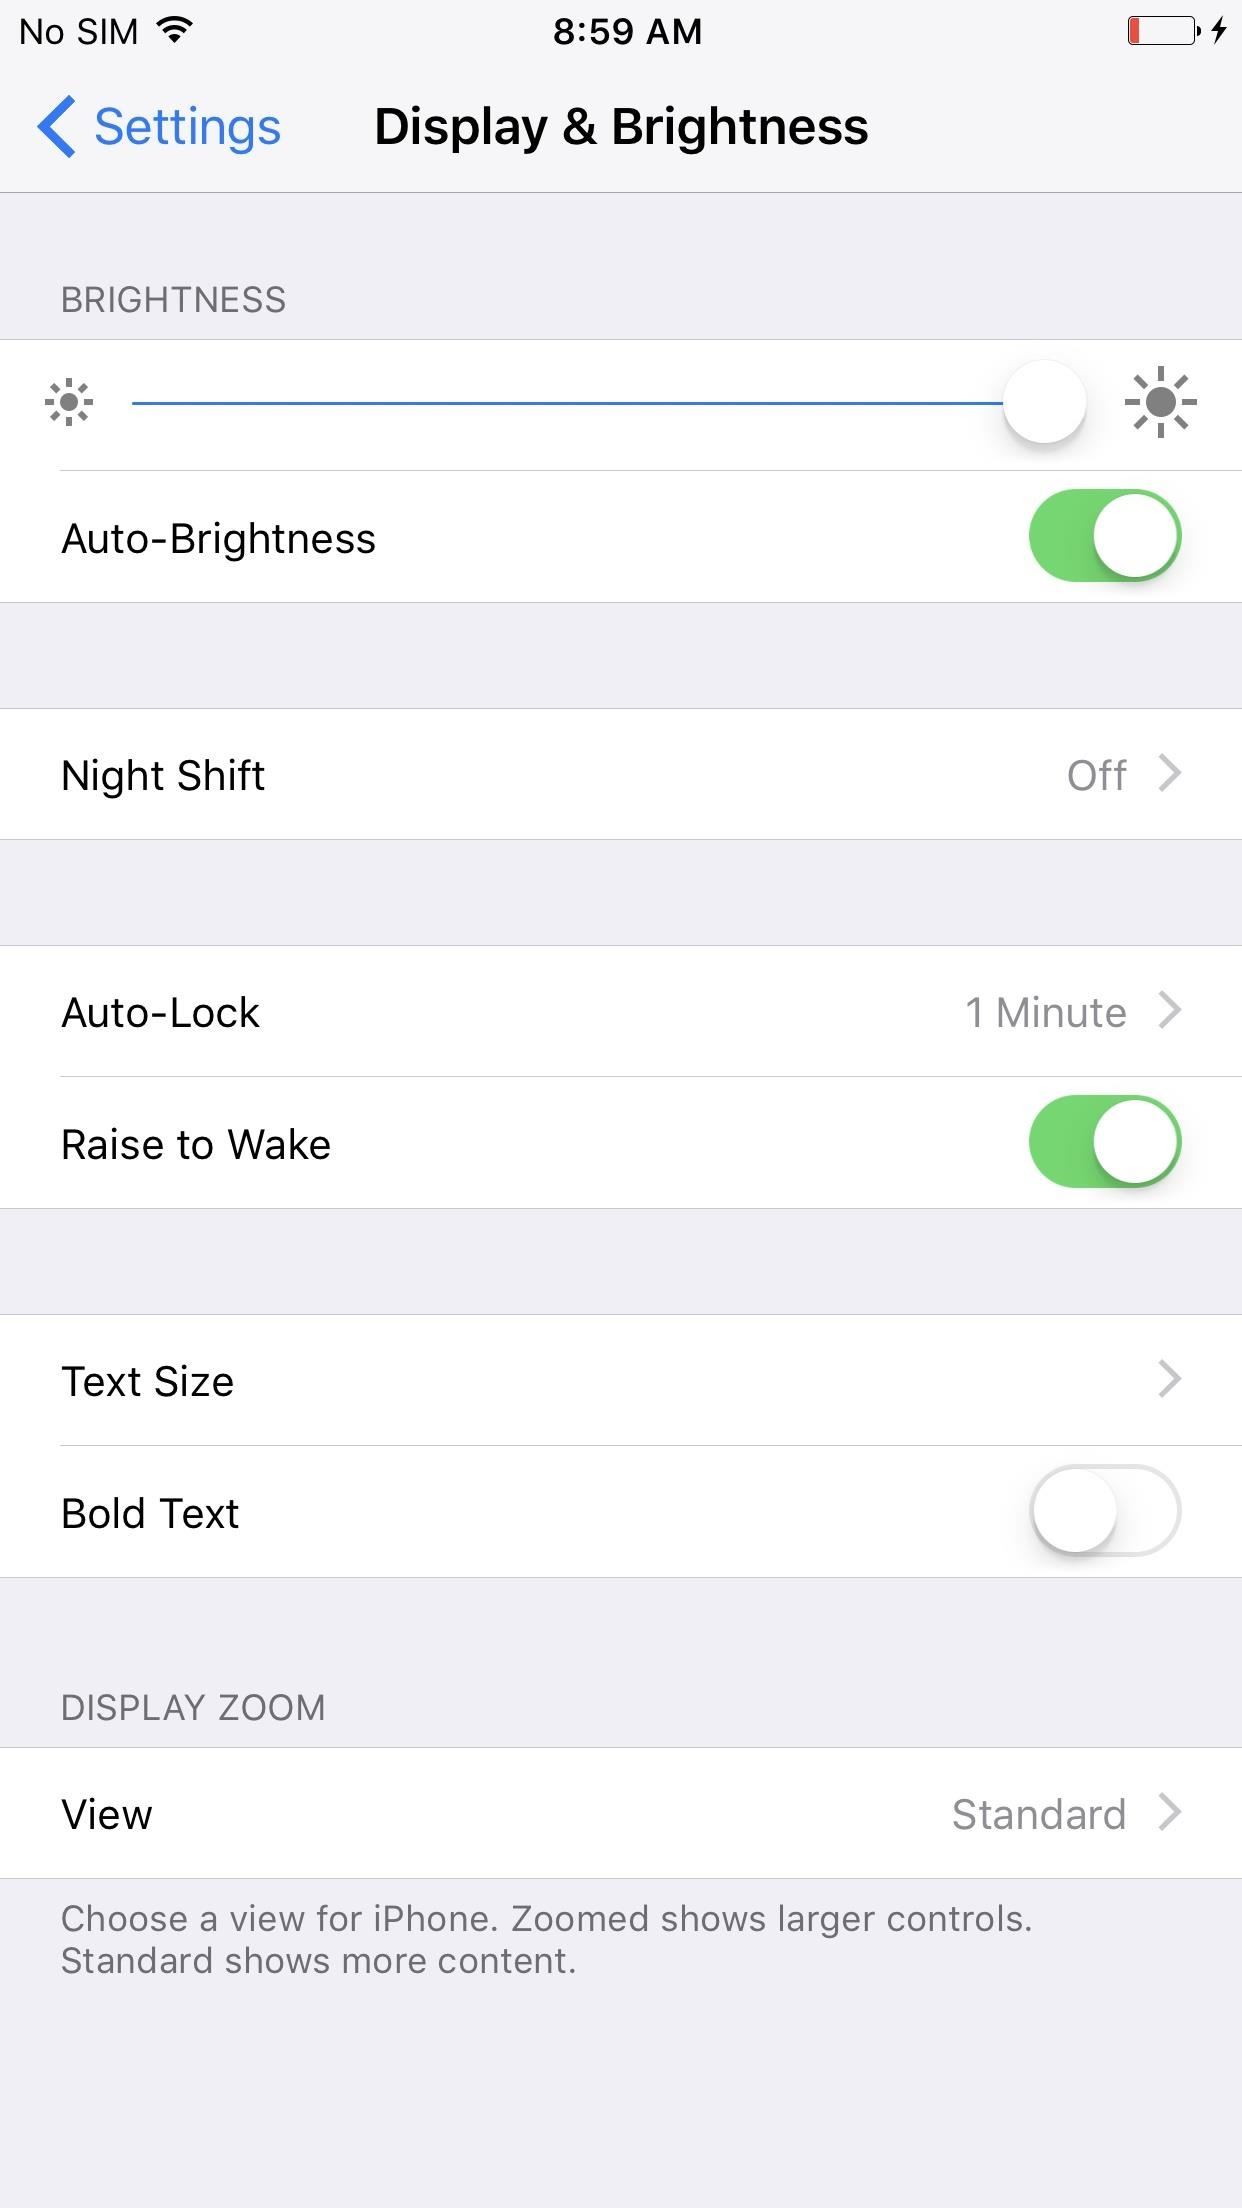 How to Turn Your iPhone's Auto-Brightness Off in iOS 12